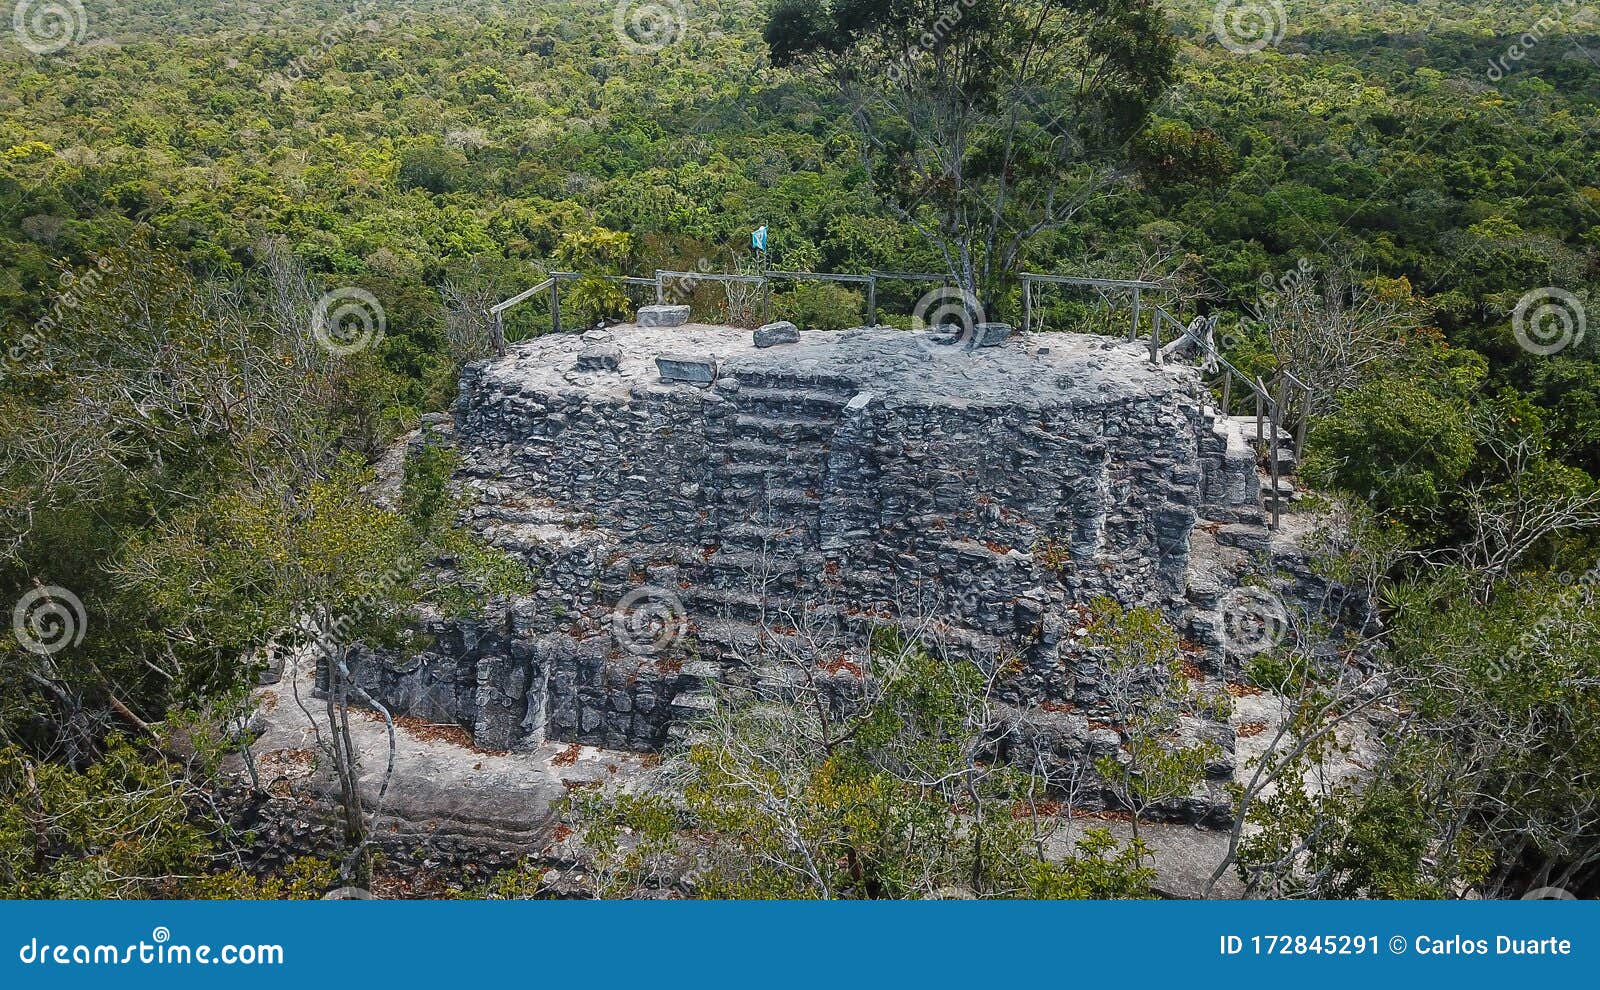 archaeological site: el mirador, the cradle of mayan civilization and the oldest mayan city in history